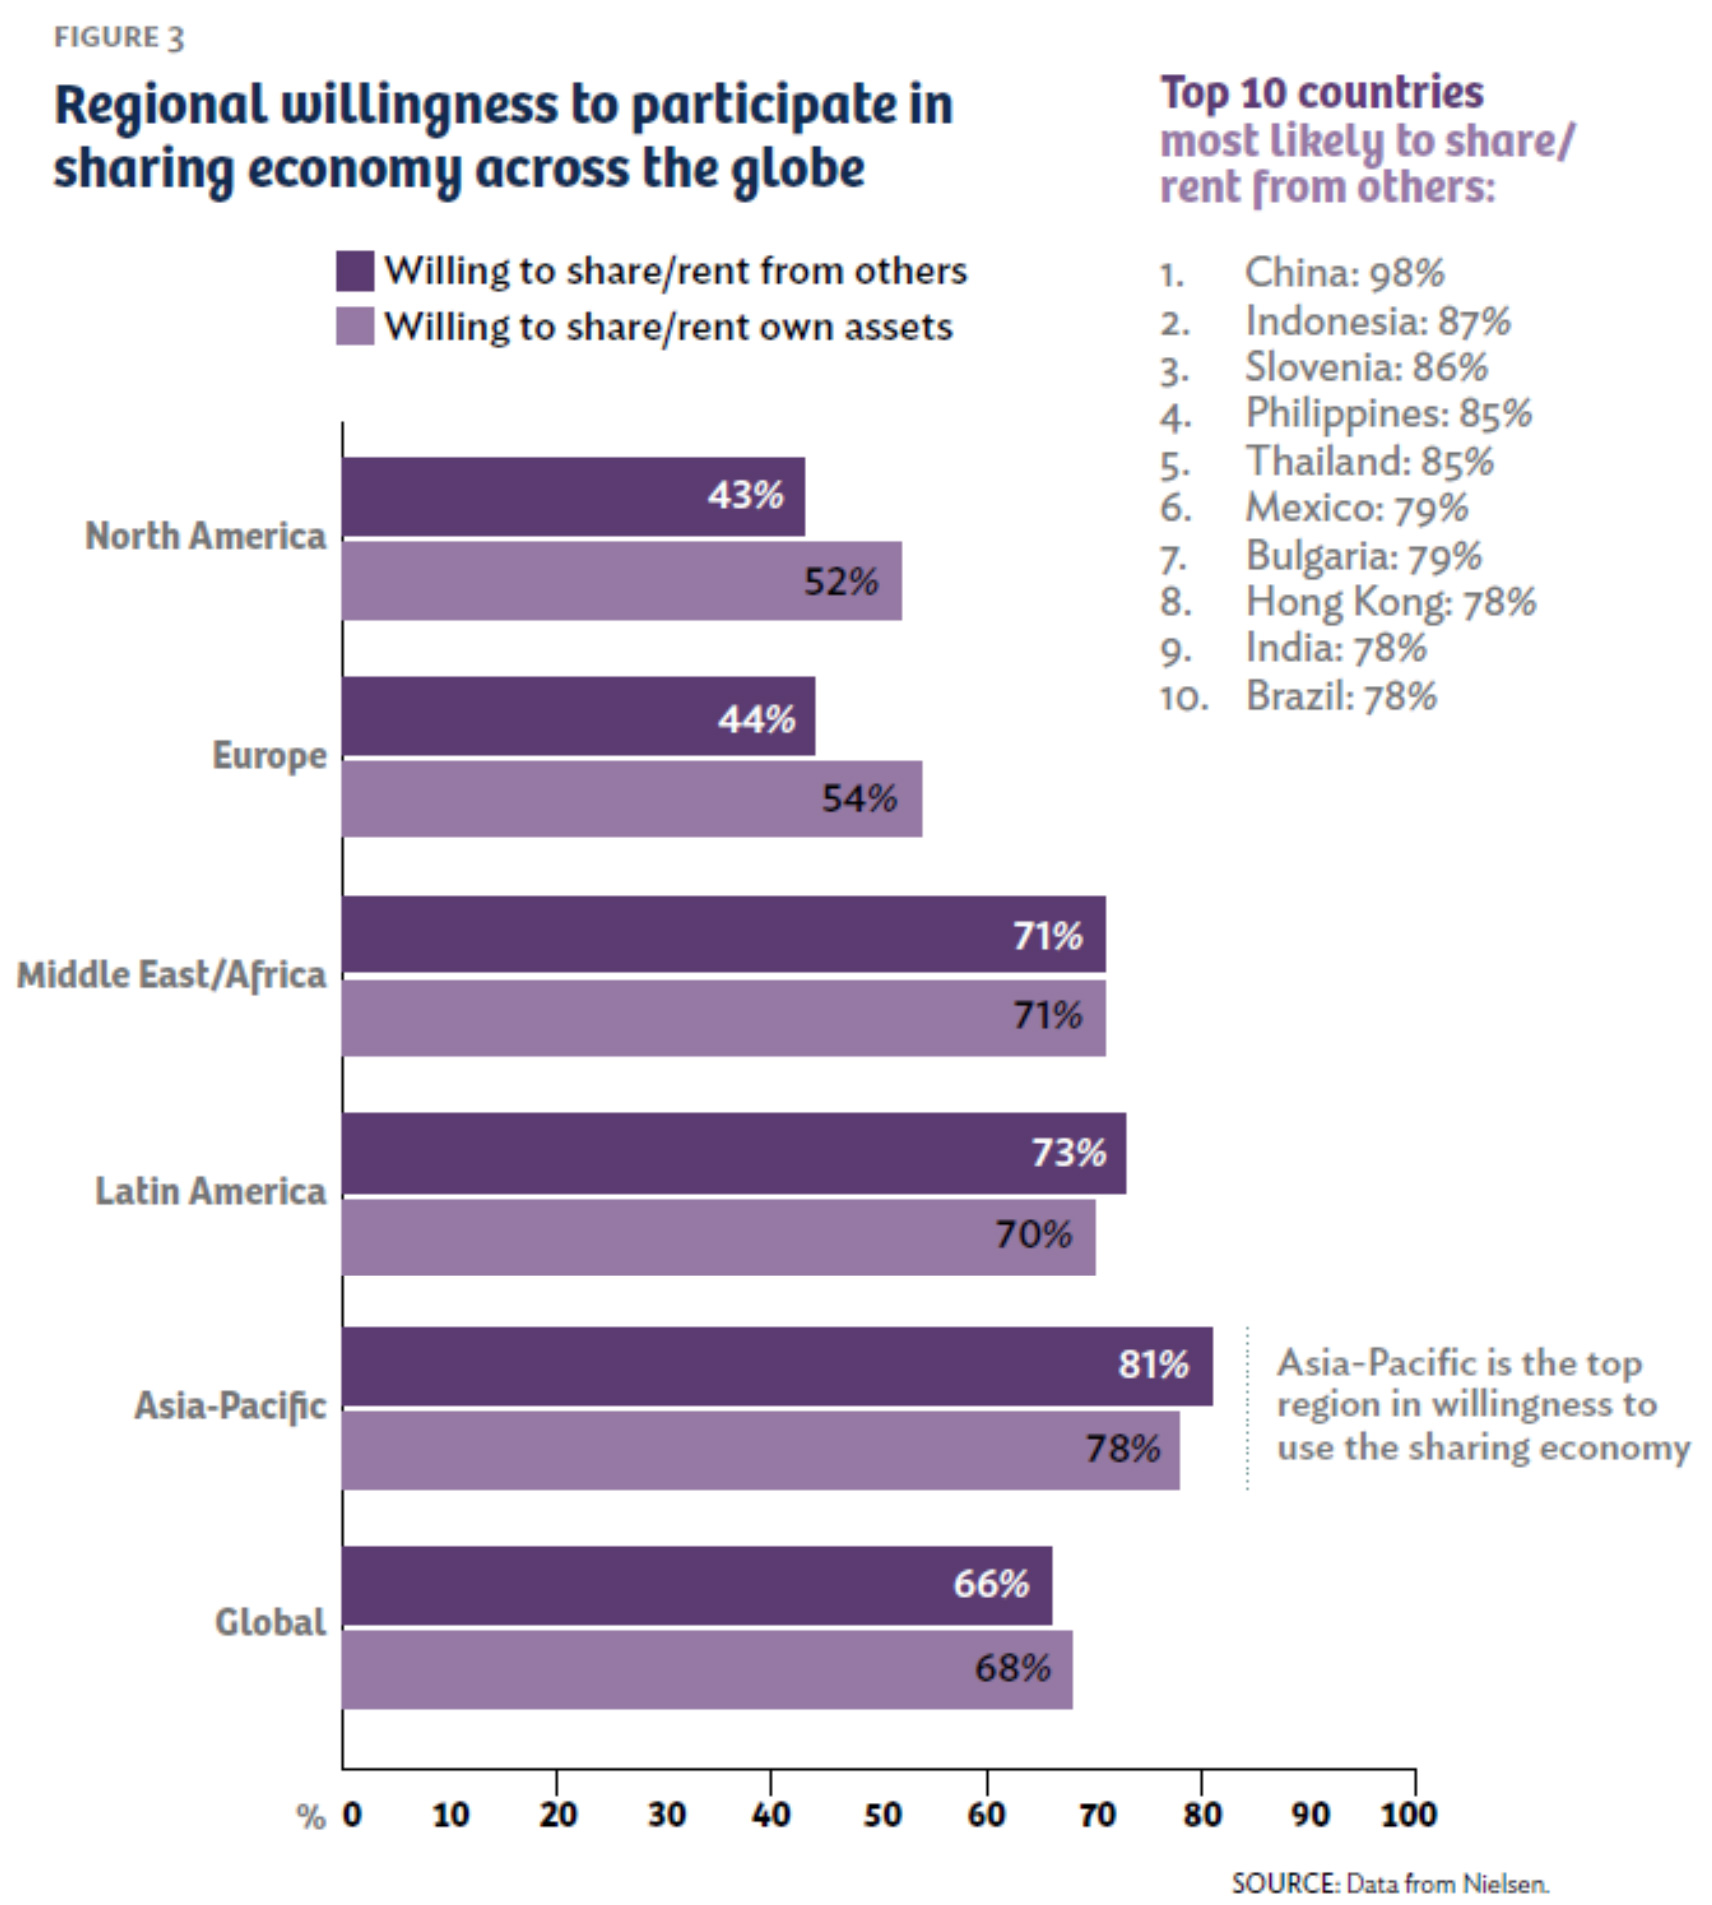 Regional willingness to participate in sharing economy across the globe